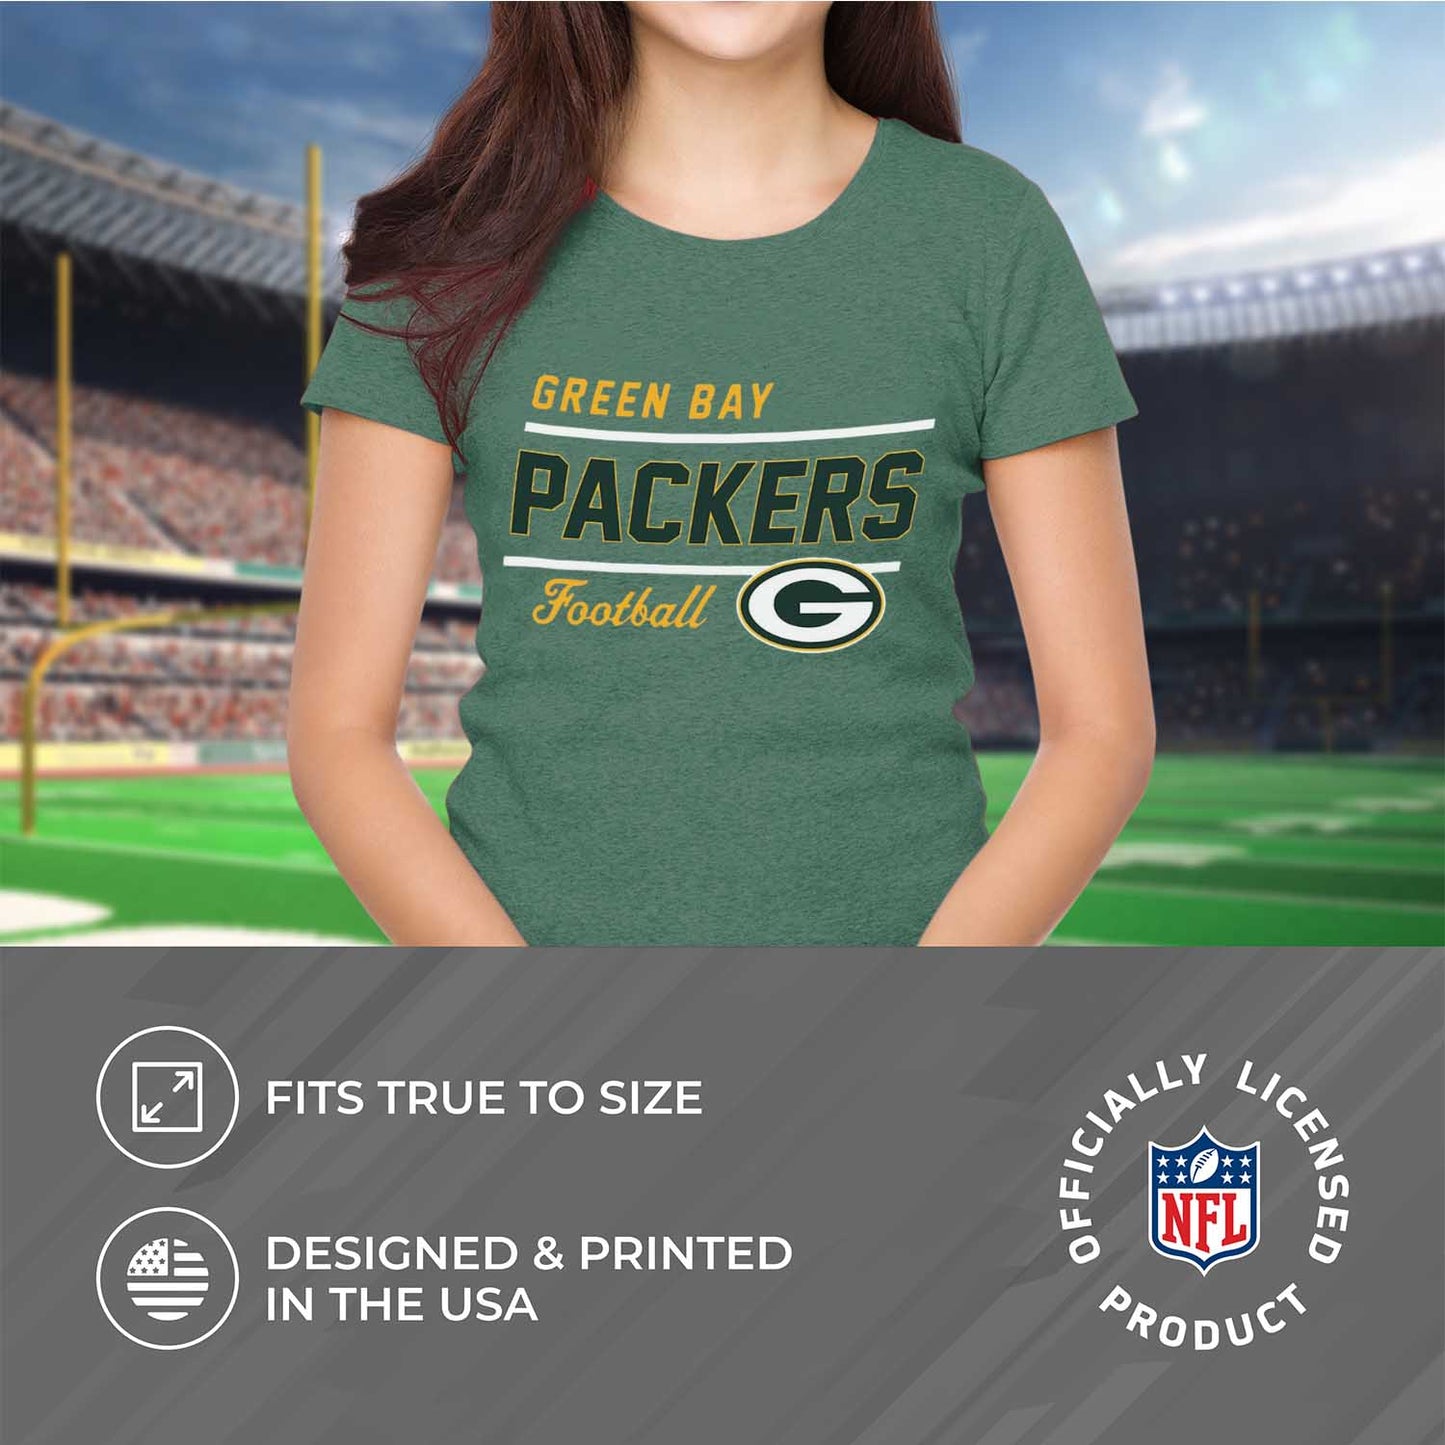 Green Bay Packers NFL Gameday Women's Relaxed Fit T-shirt - Team Color